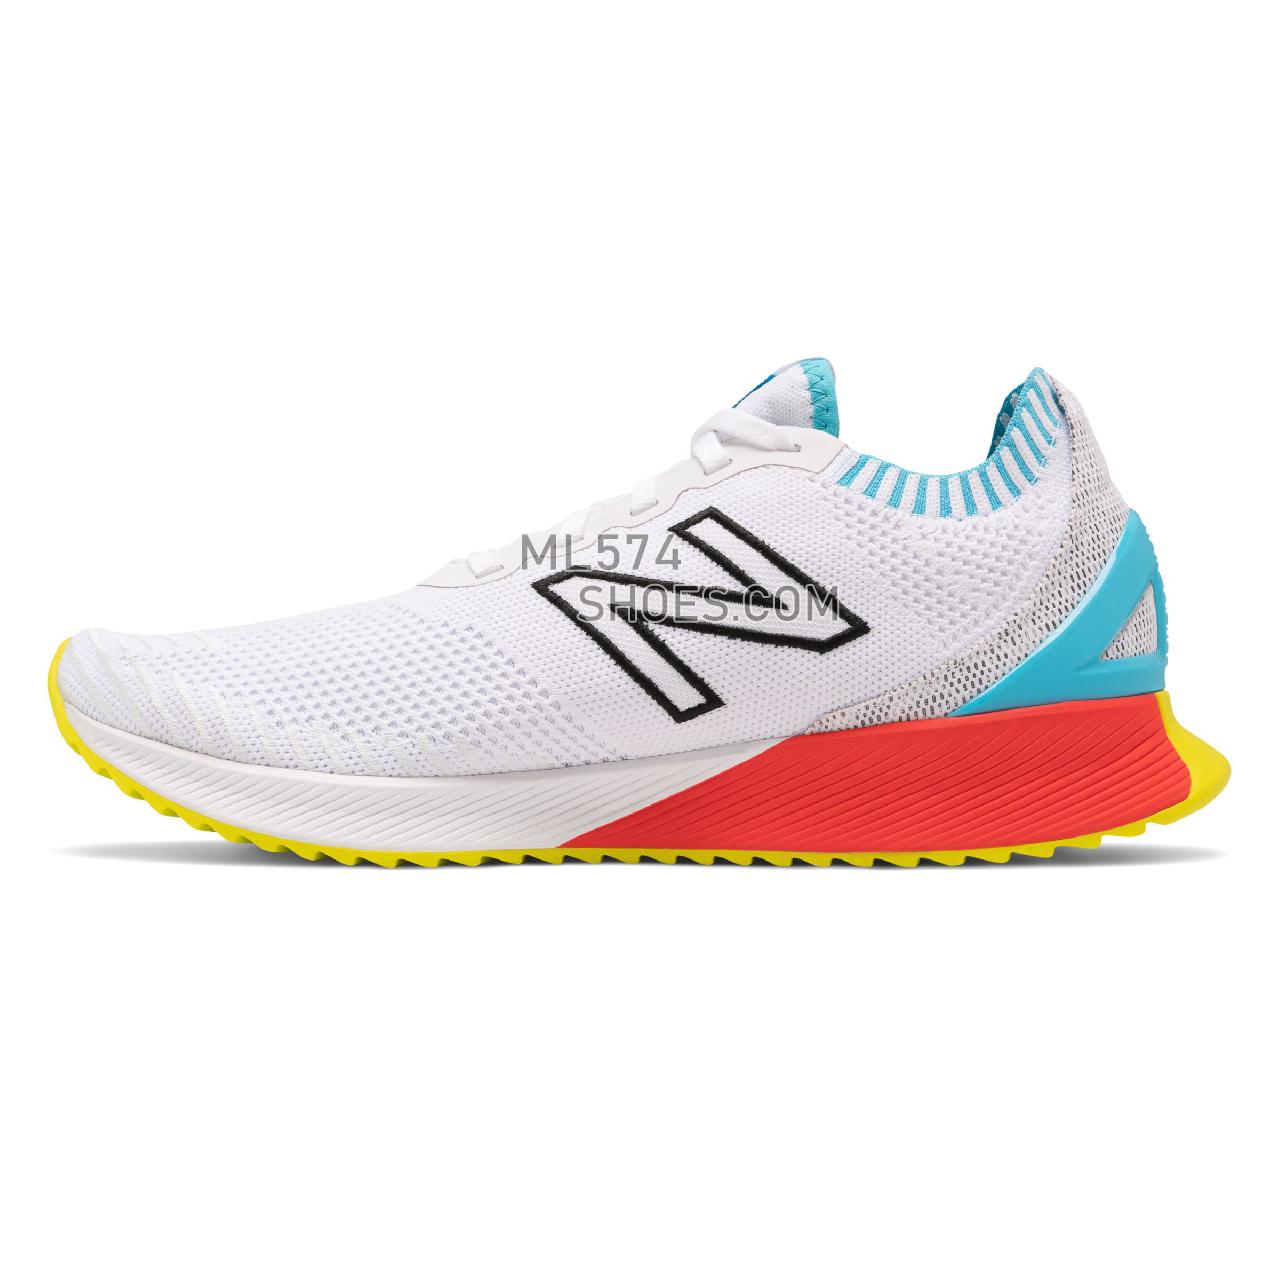 New Balance FuelCell Echo - Men's Neutral Running - White with Bayside and Energy Red - MFCECSW